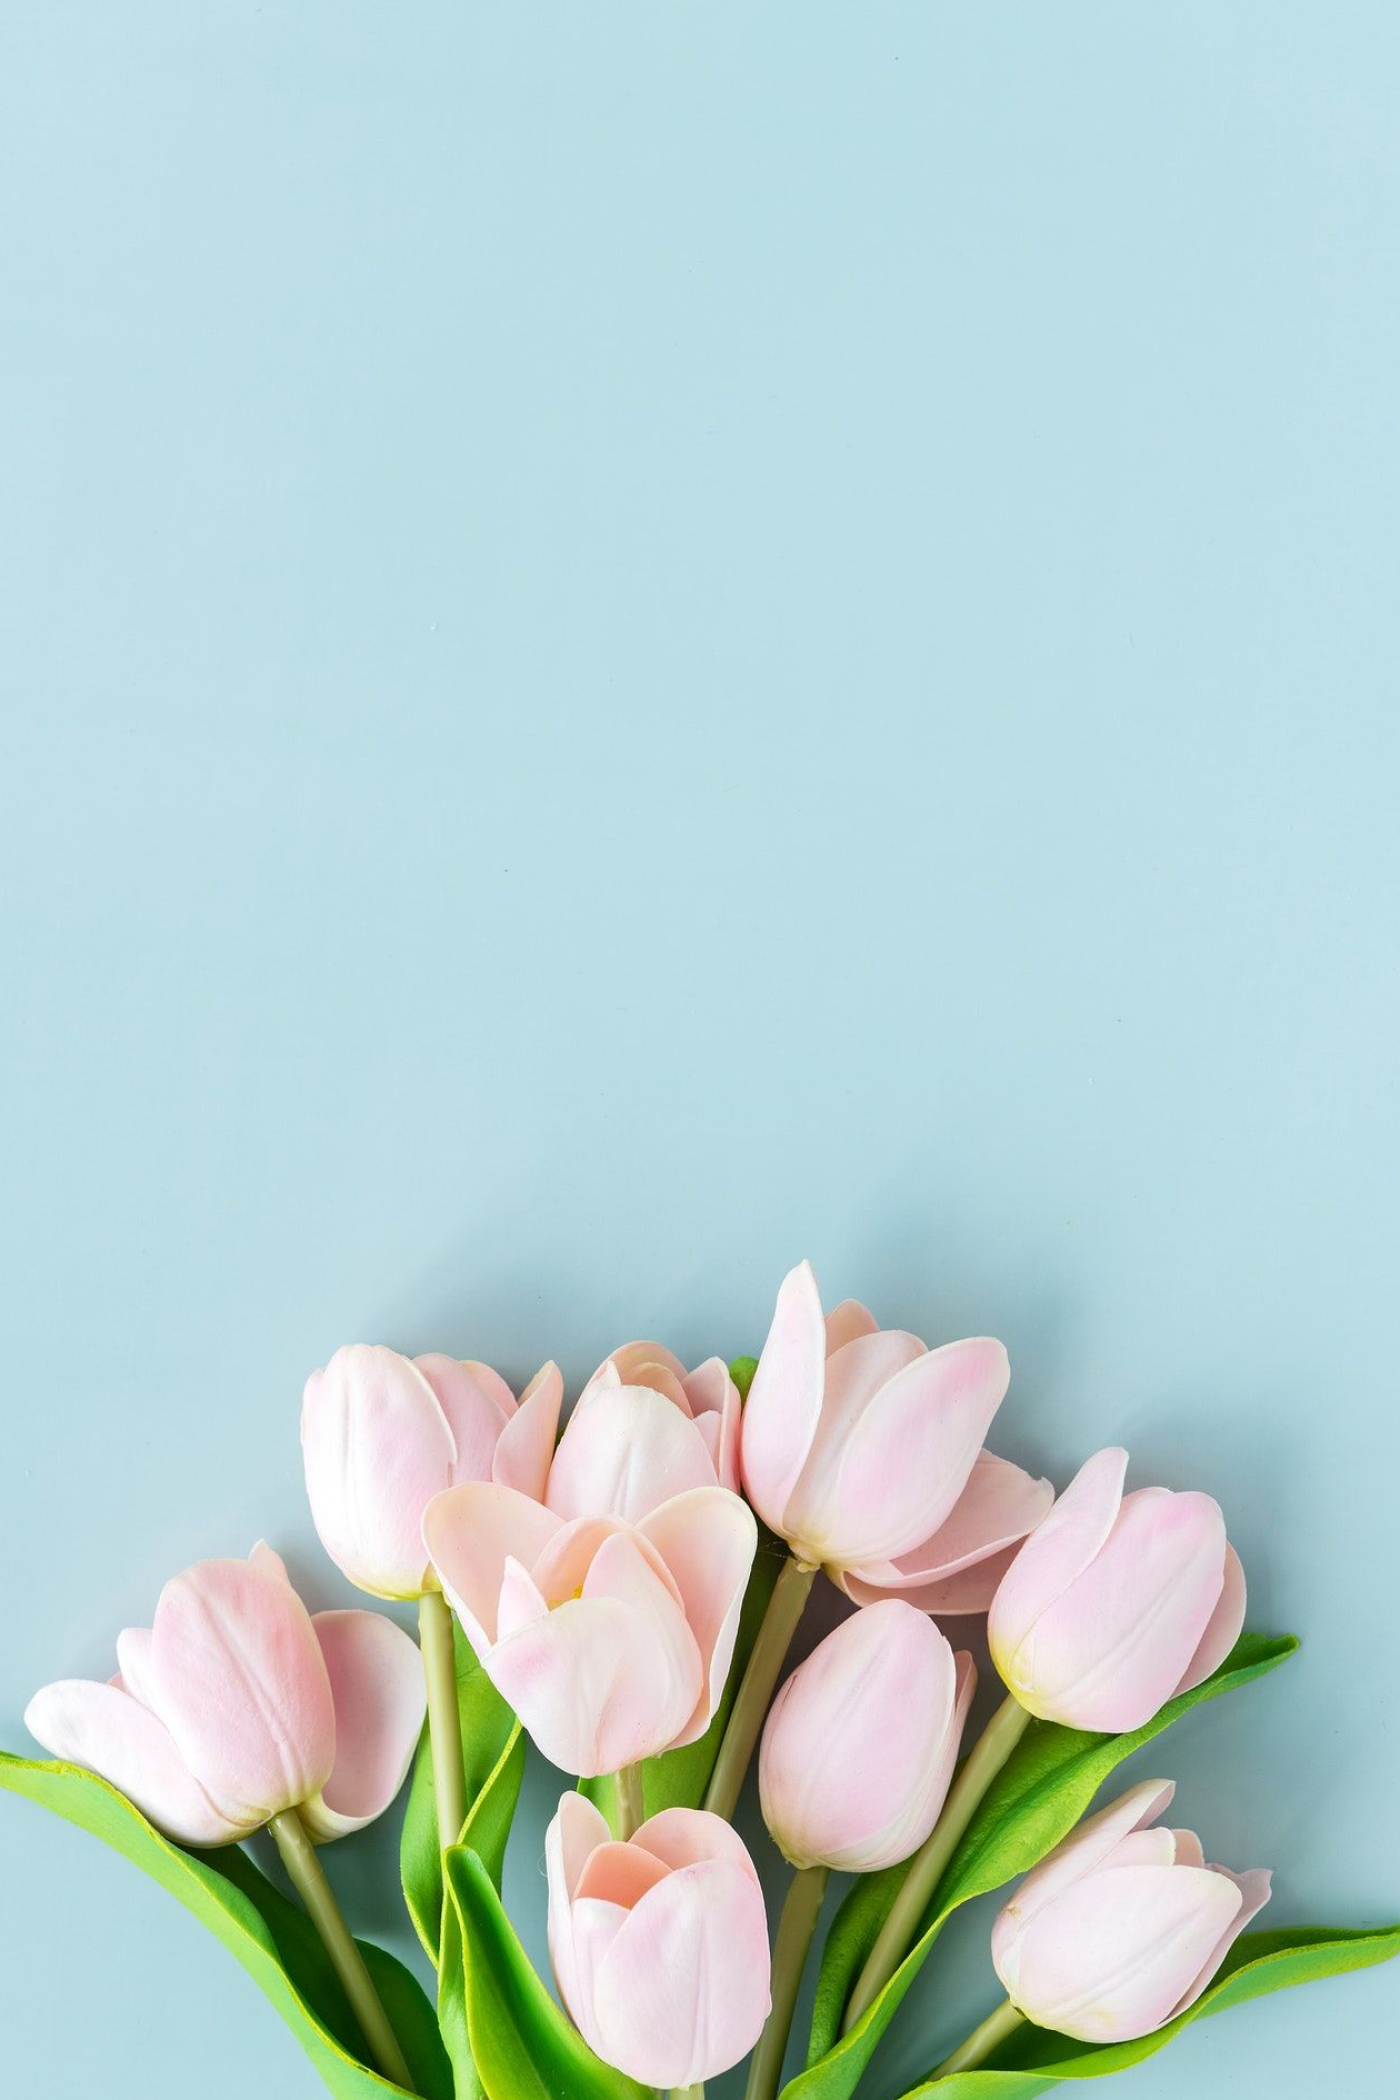 1400x2100 Pink tulip on blank blue background template | premium image by / Ake | Pink flowers background, Spring wallpaper, Flower background wallpaper